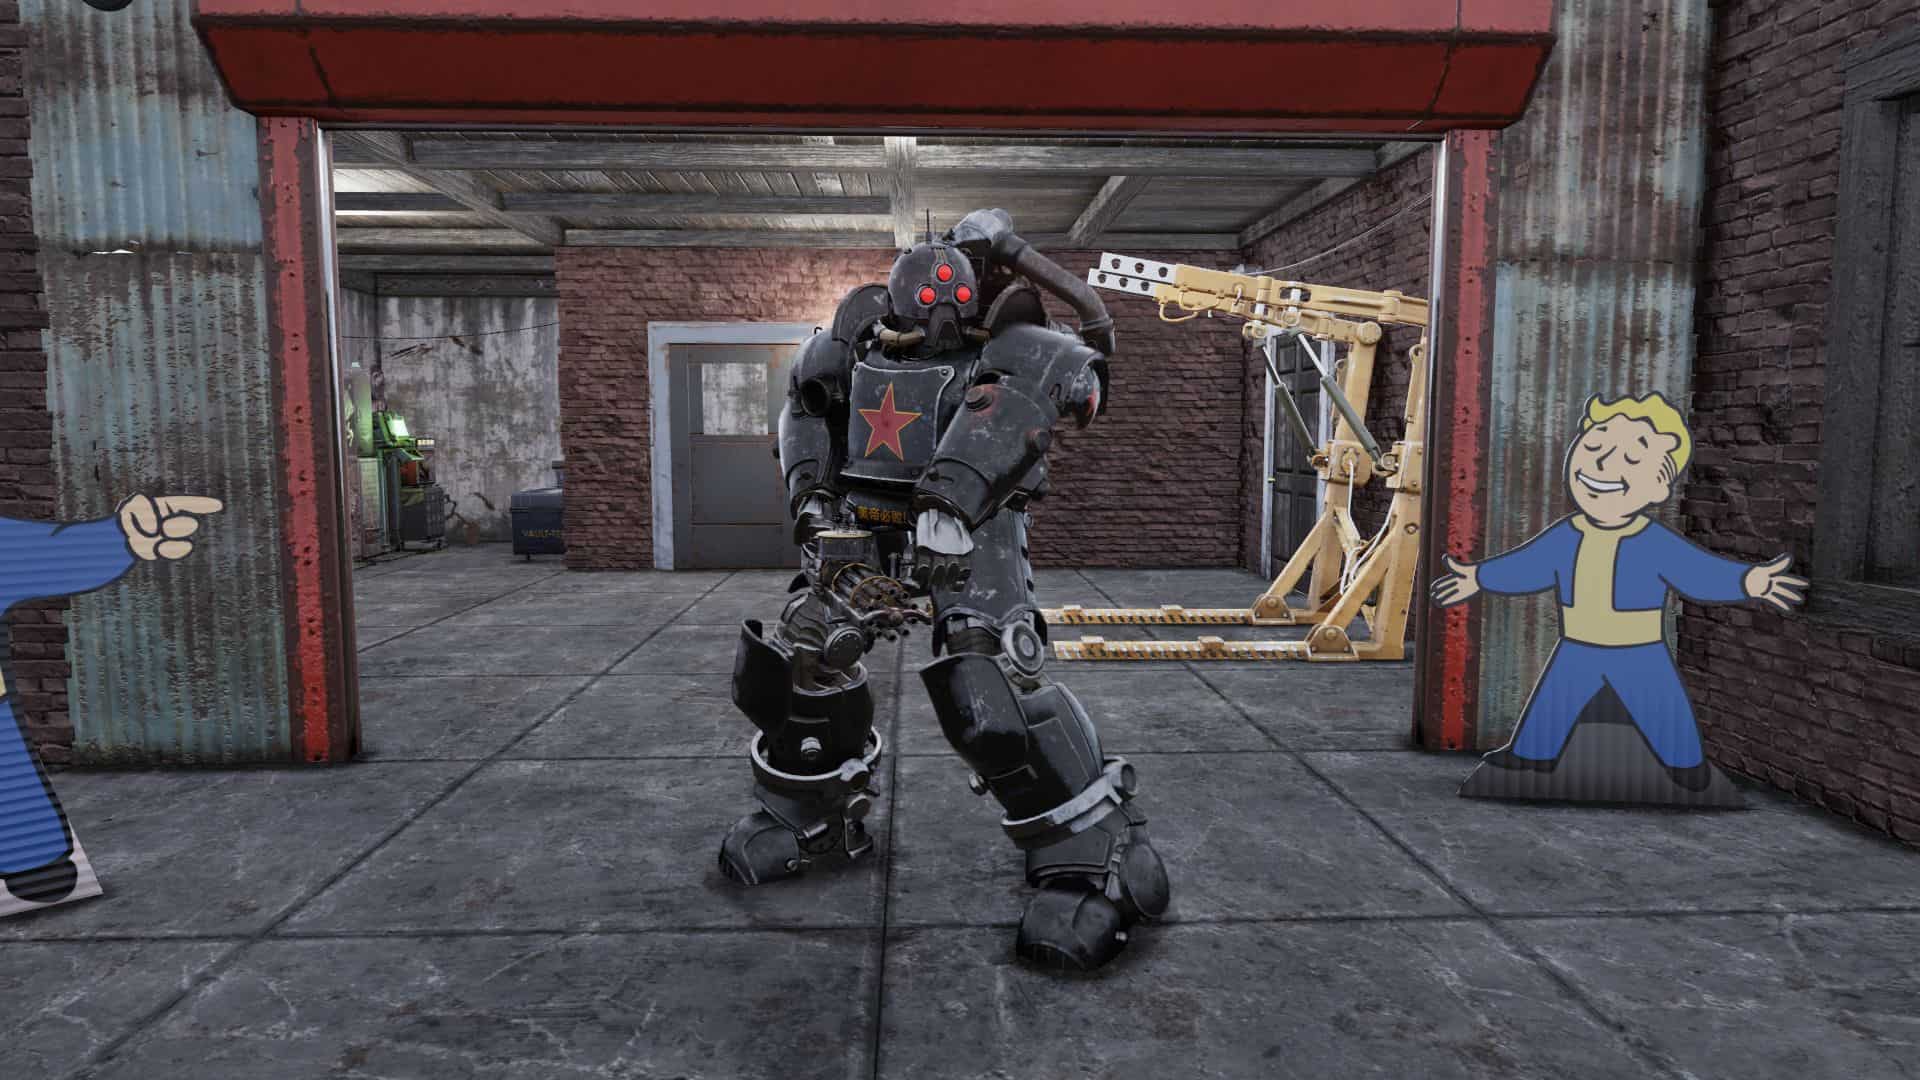 Red Shift Power Armor Black Retexture - Fallout 76 Mod download.